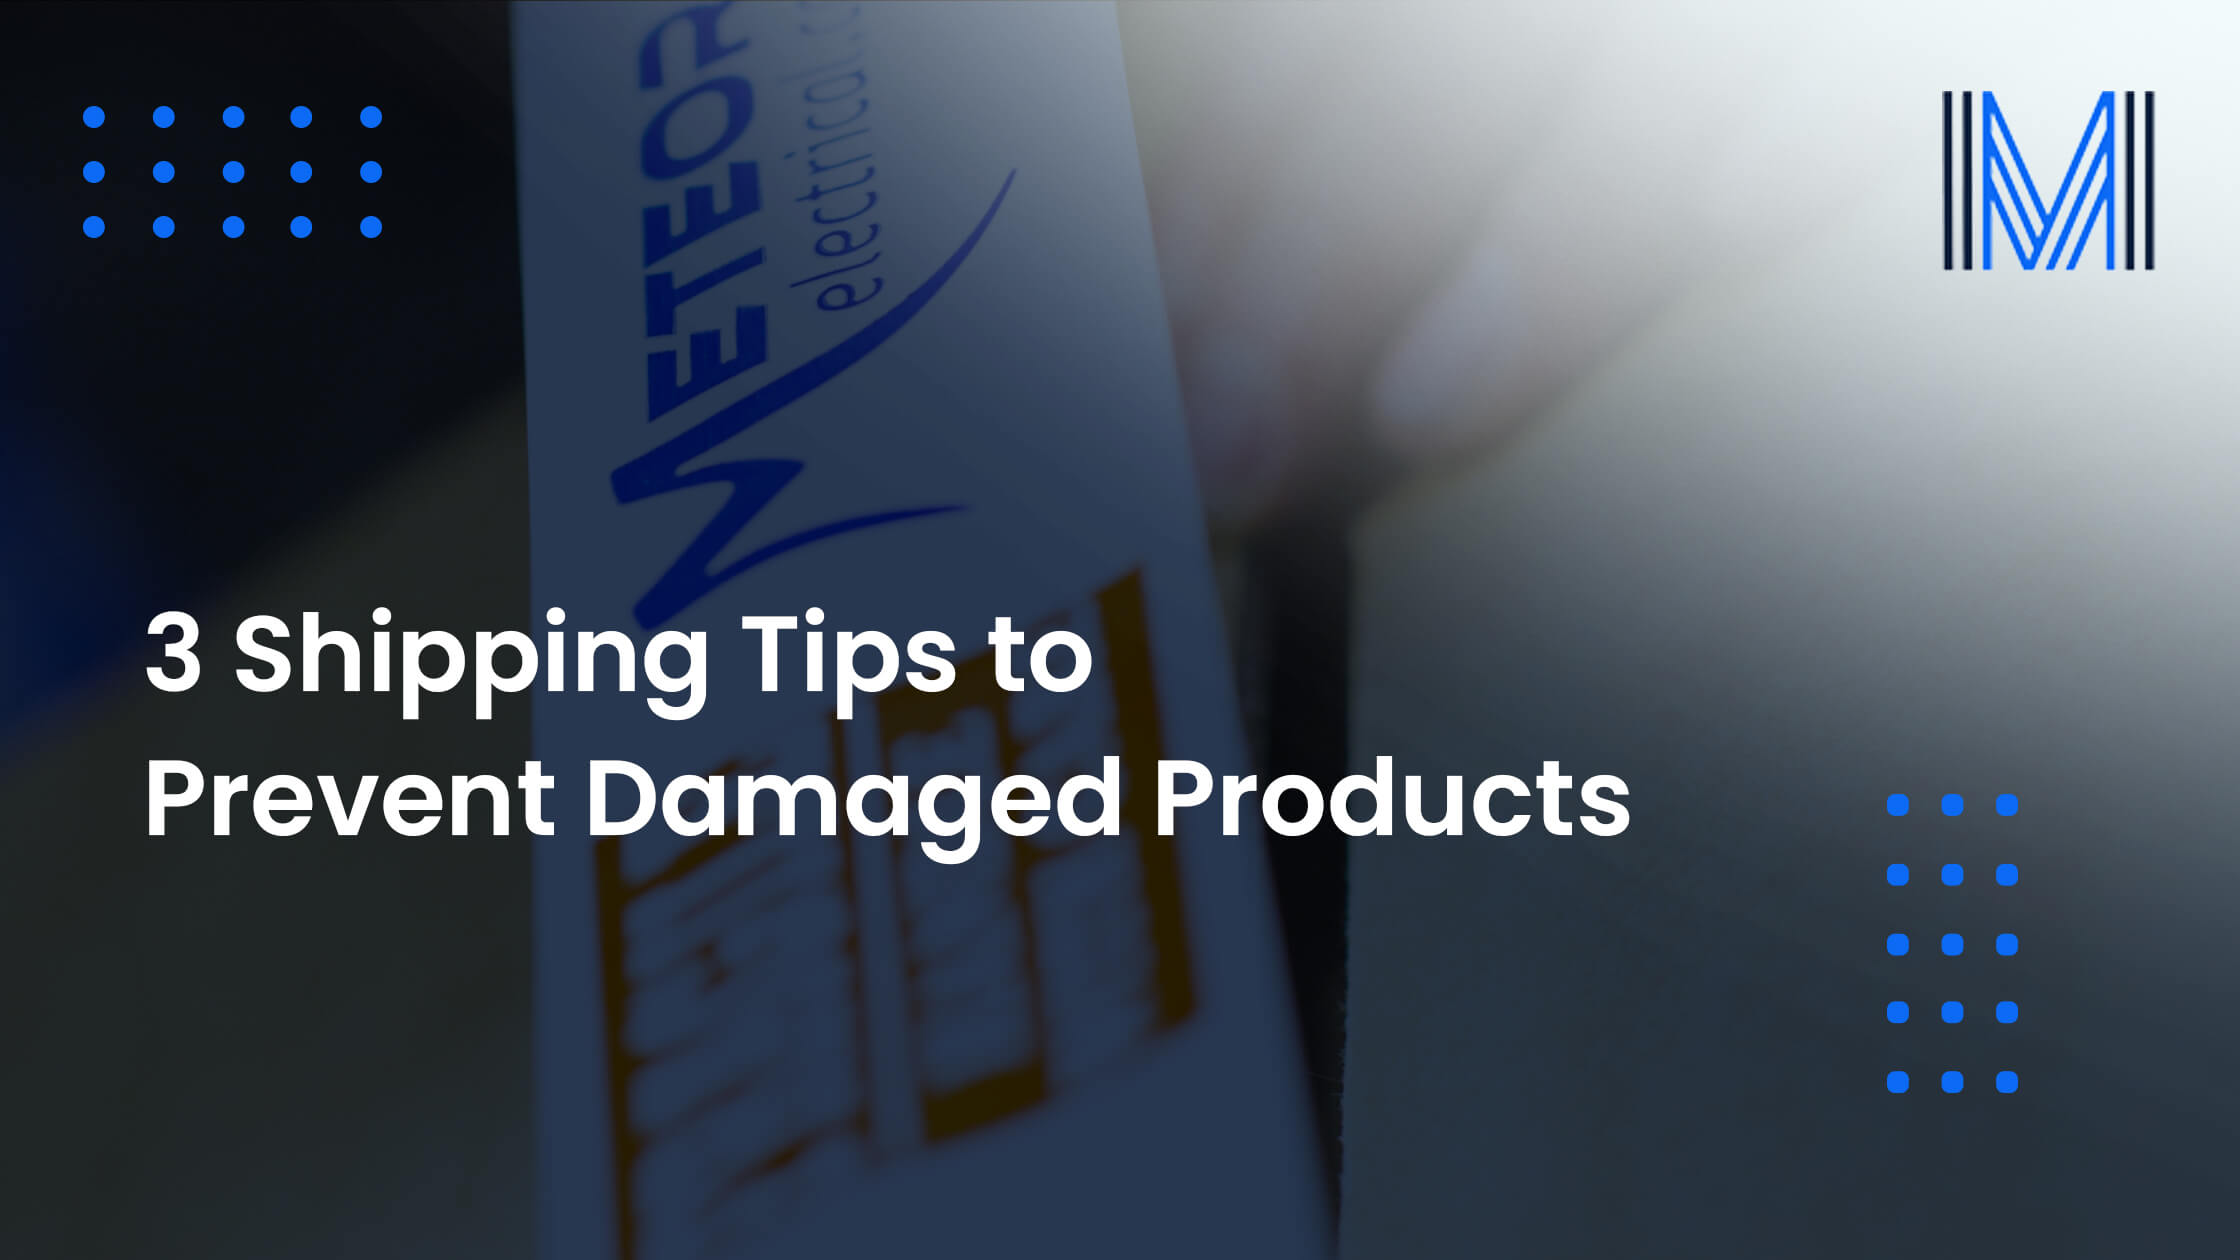 3 Shipping Tips to Prevent Damaged Products